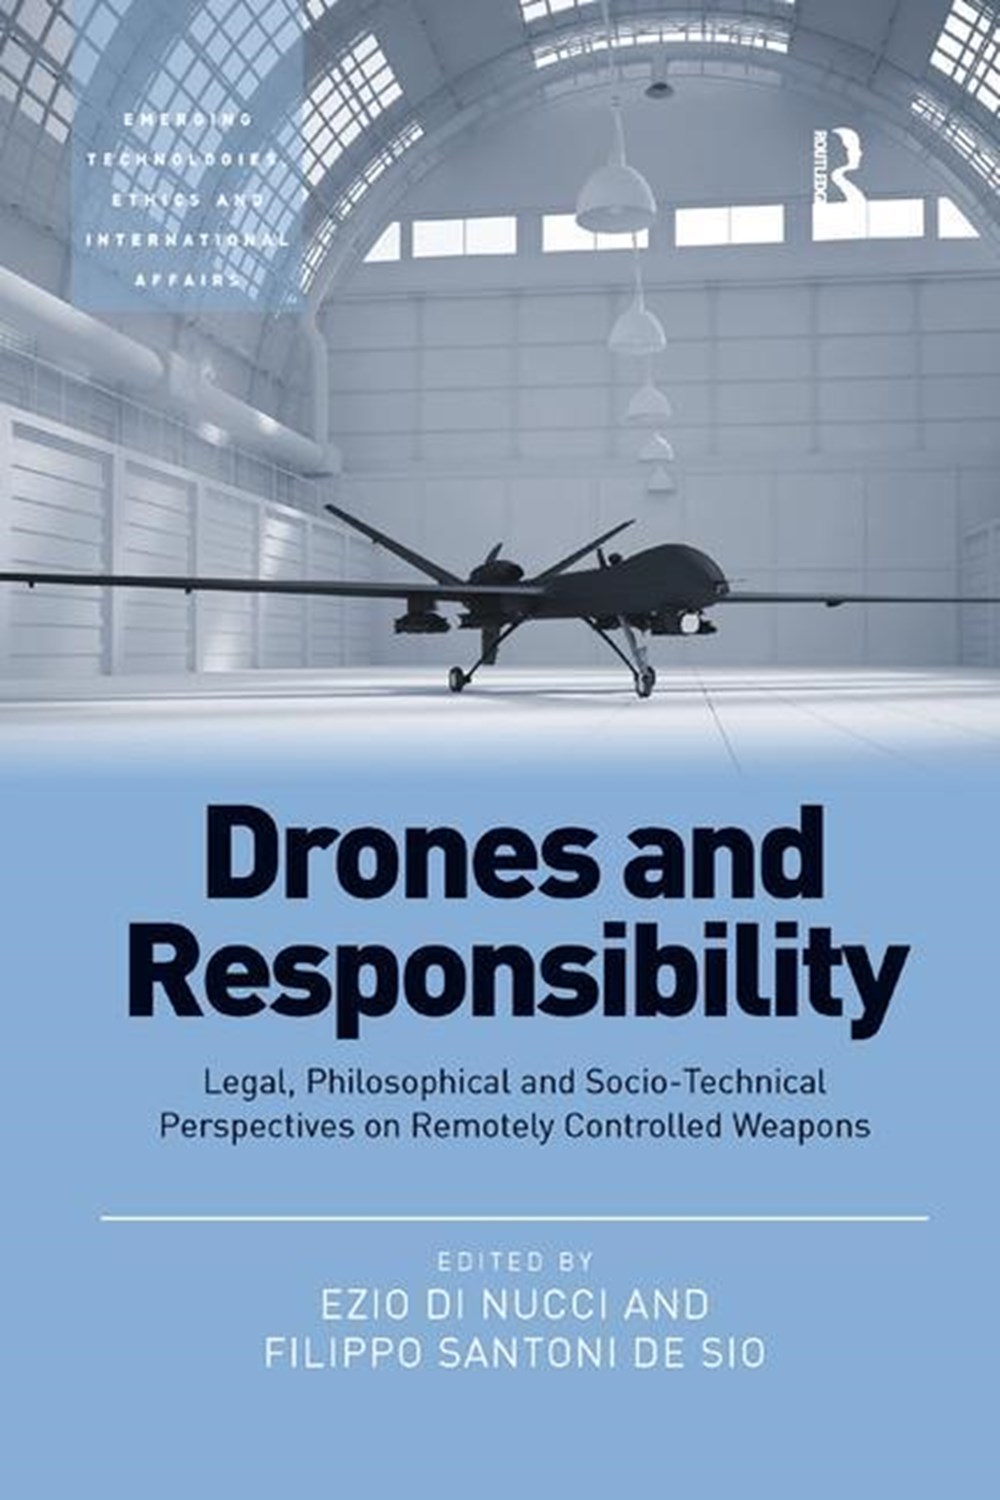 Drones and Responsibility: Legal, Philosophical and Socio-Technical Perspectives on Remotely Control